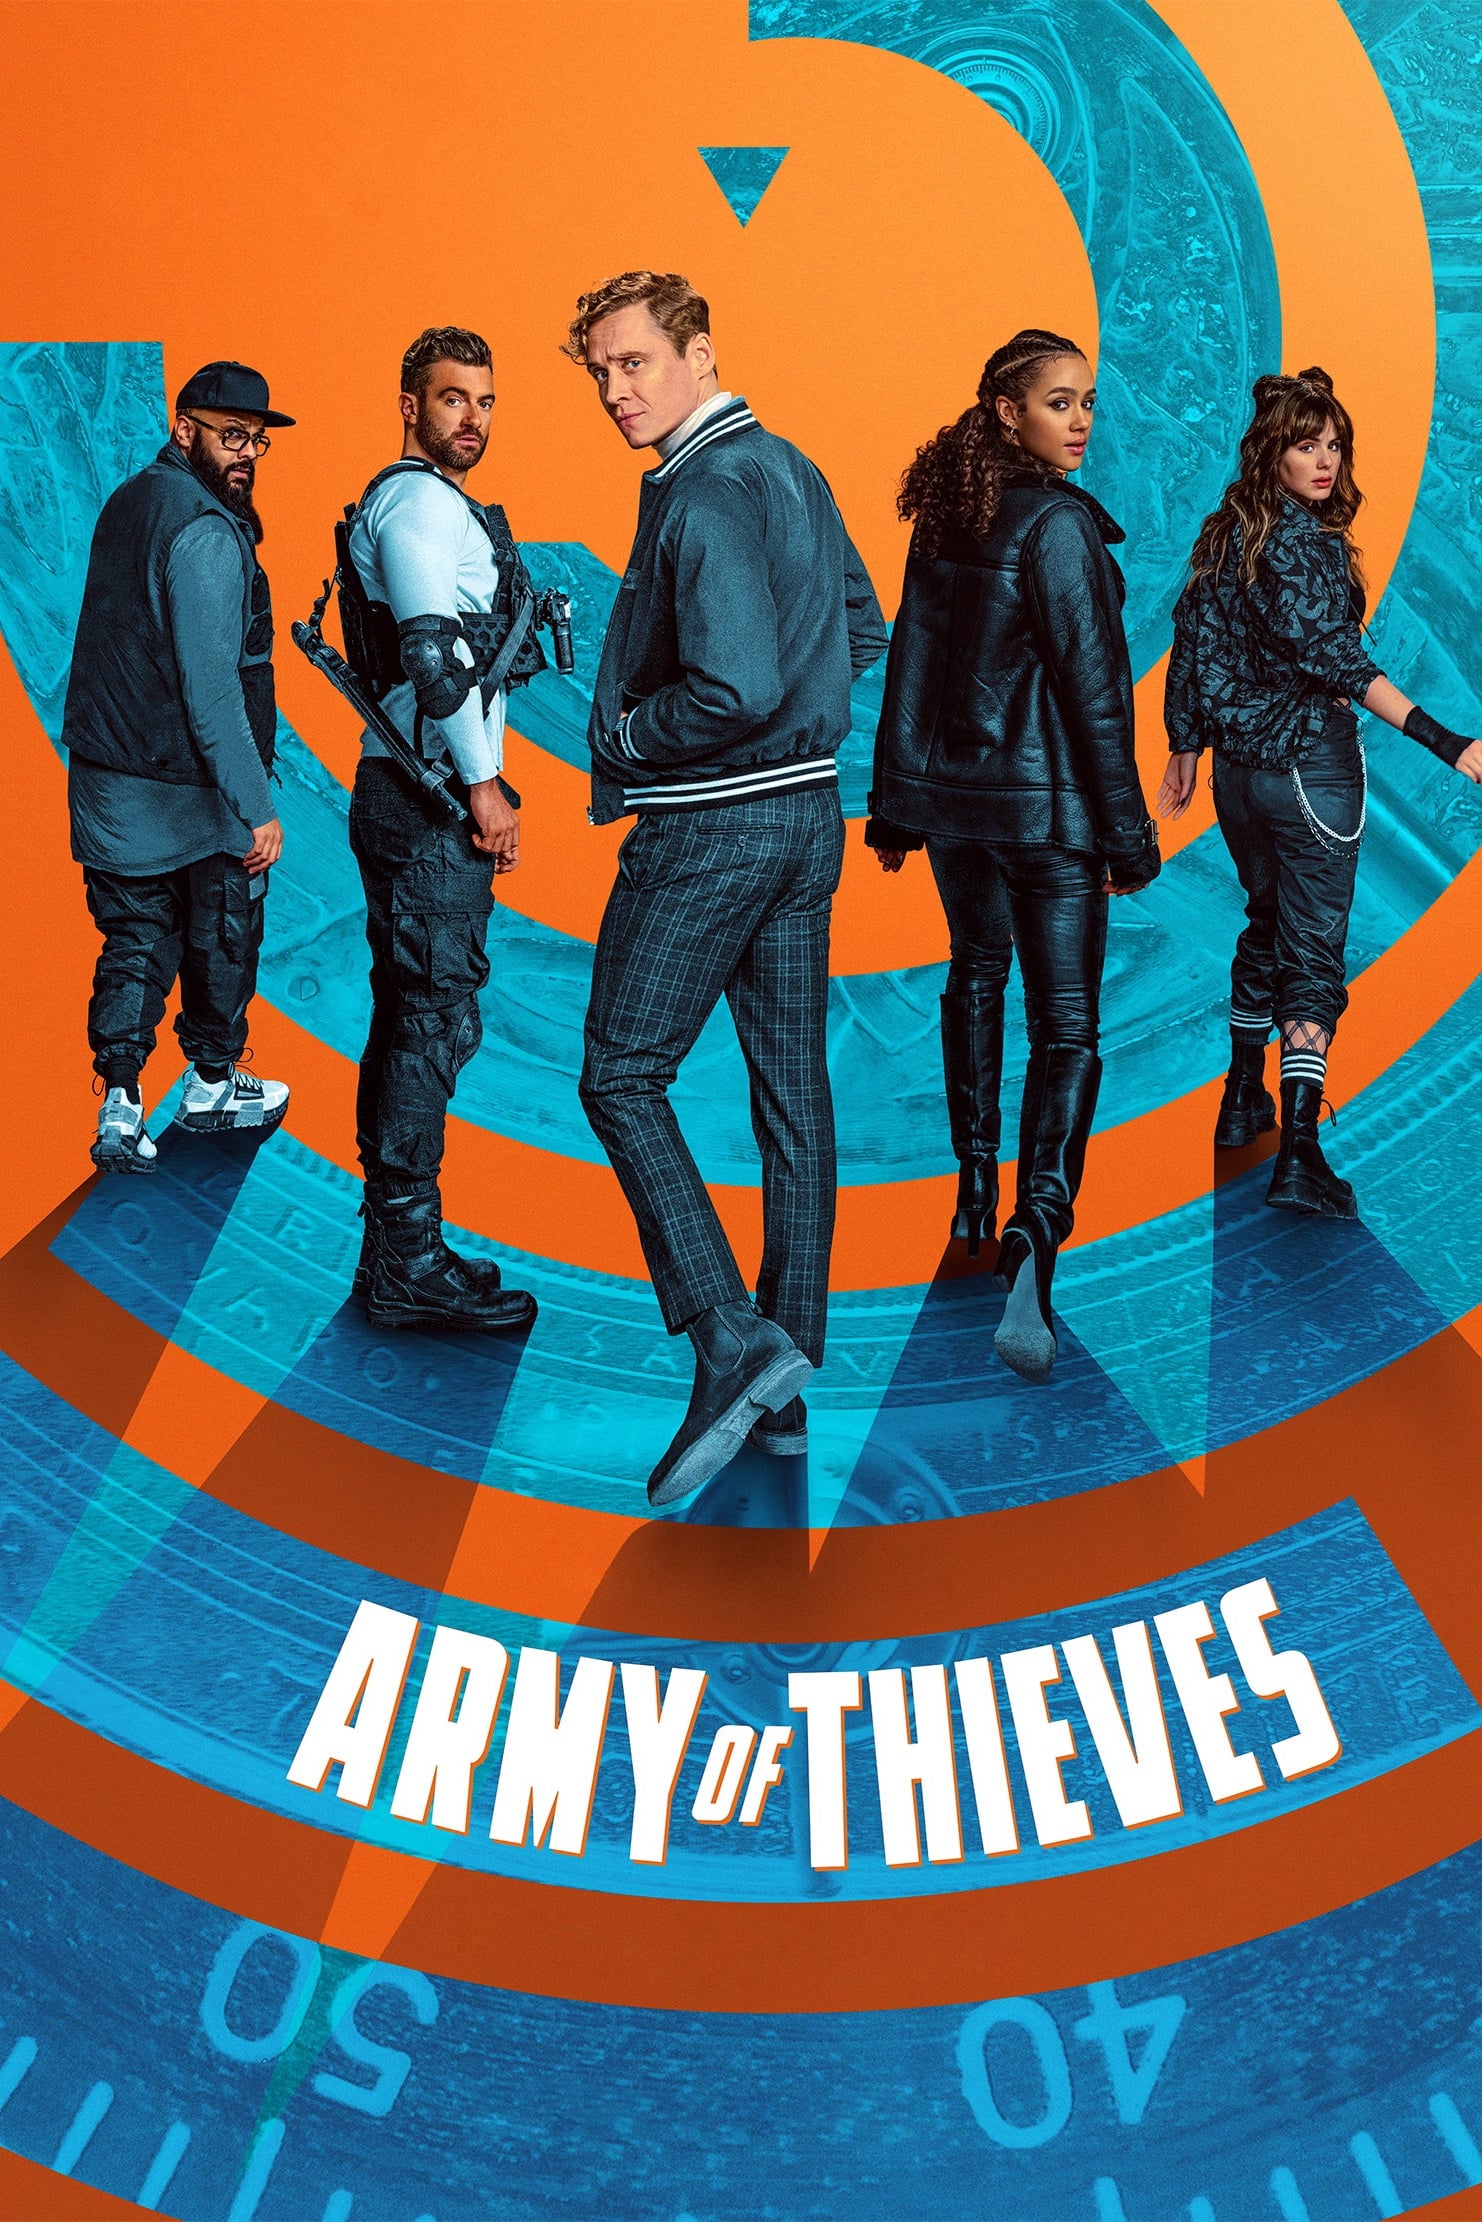 Poster Army of Thieves